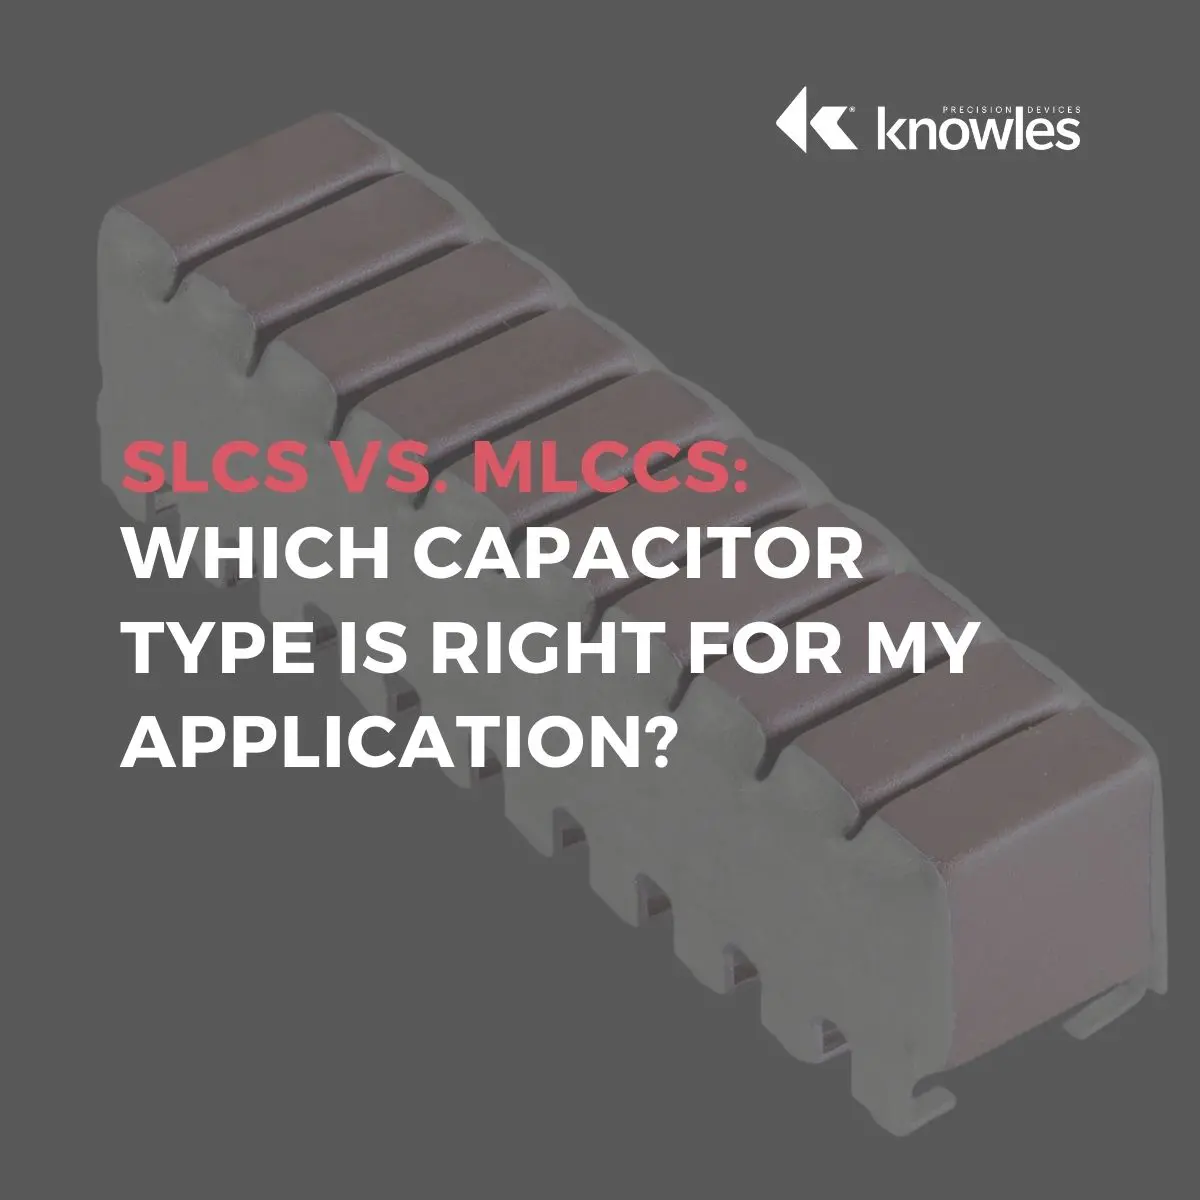 SLCs vs. MLCCs: Which Capacitor Type is Right for My Application?